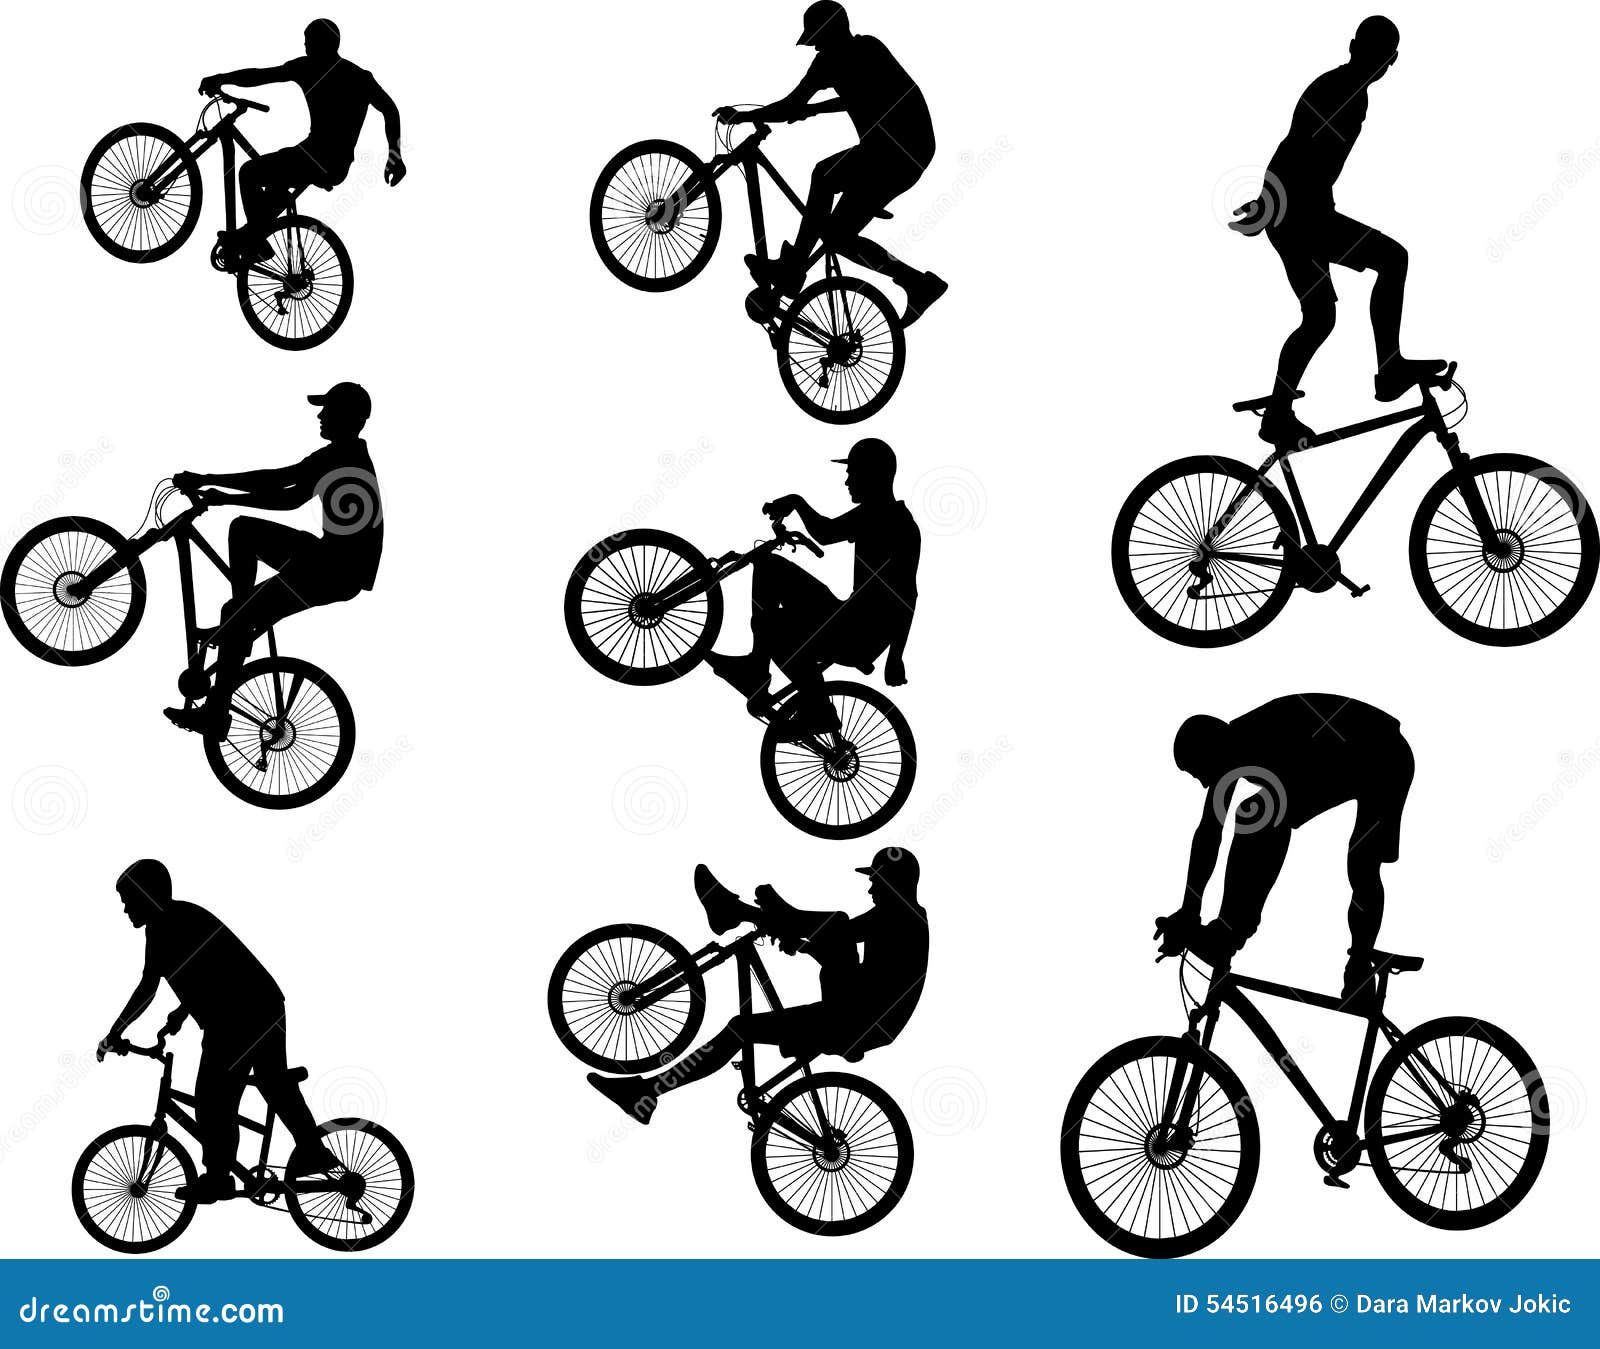 bicycle stunt vector silhouette people riding bike doing stunts 54516496